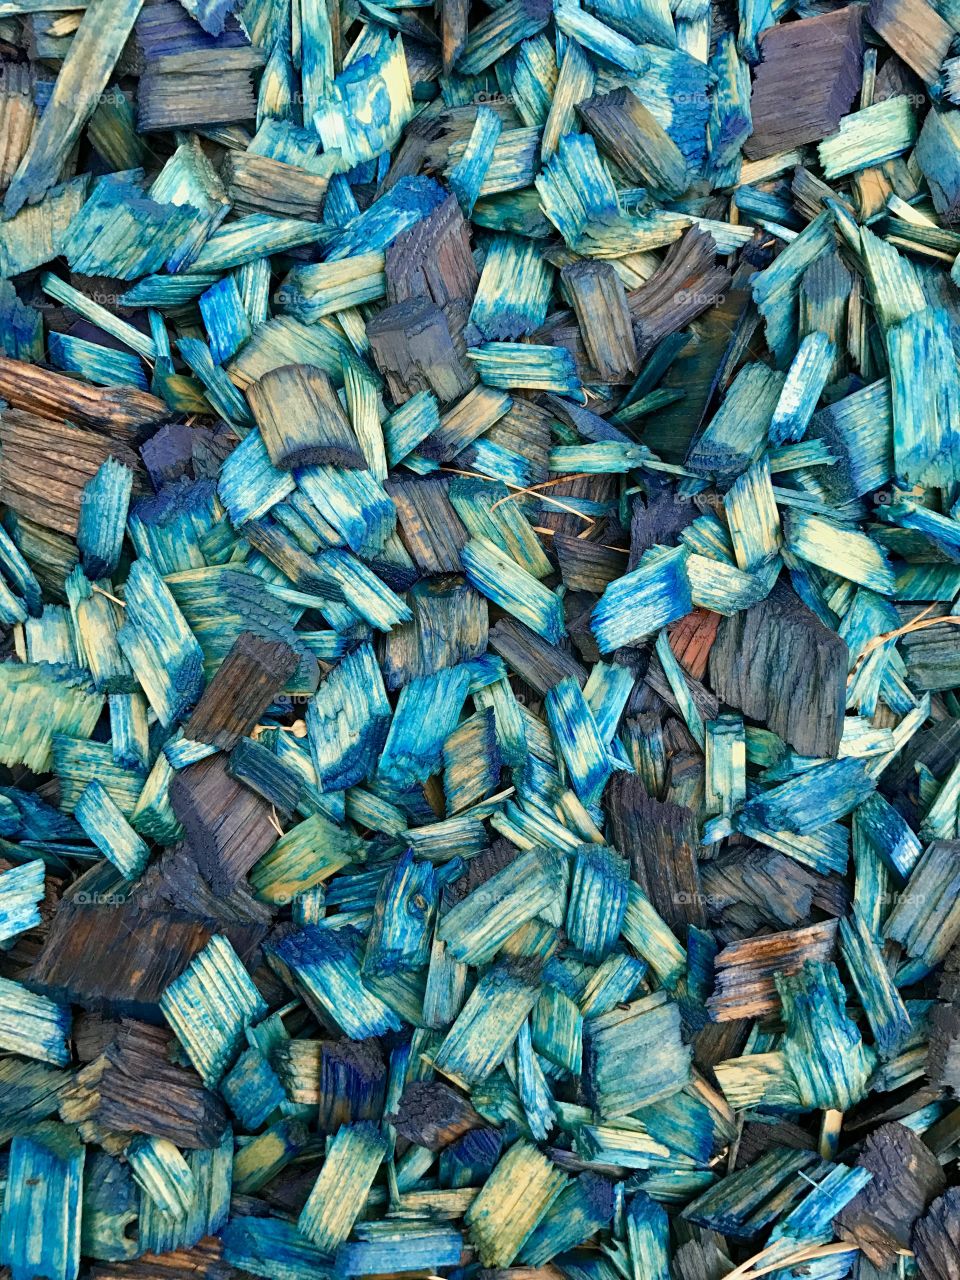 Small wooden pieces colored with blue 